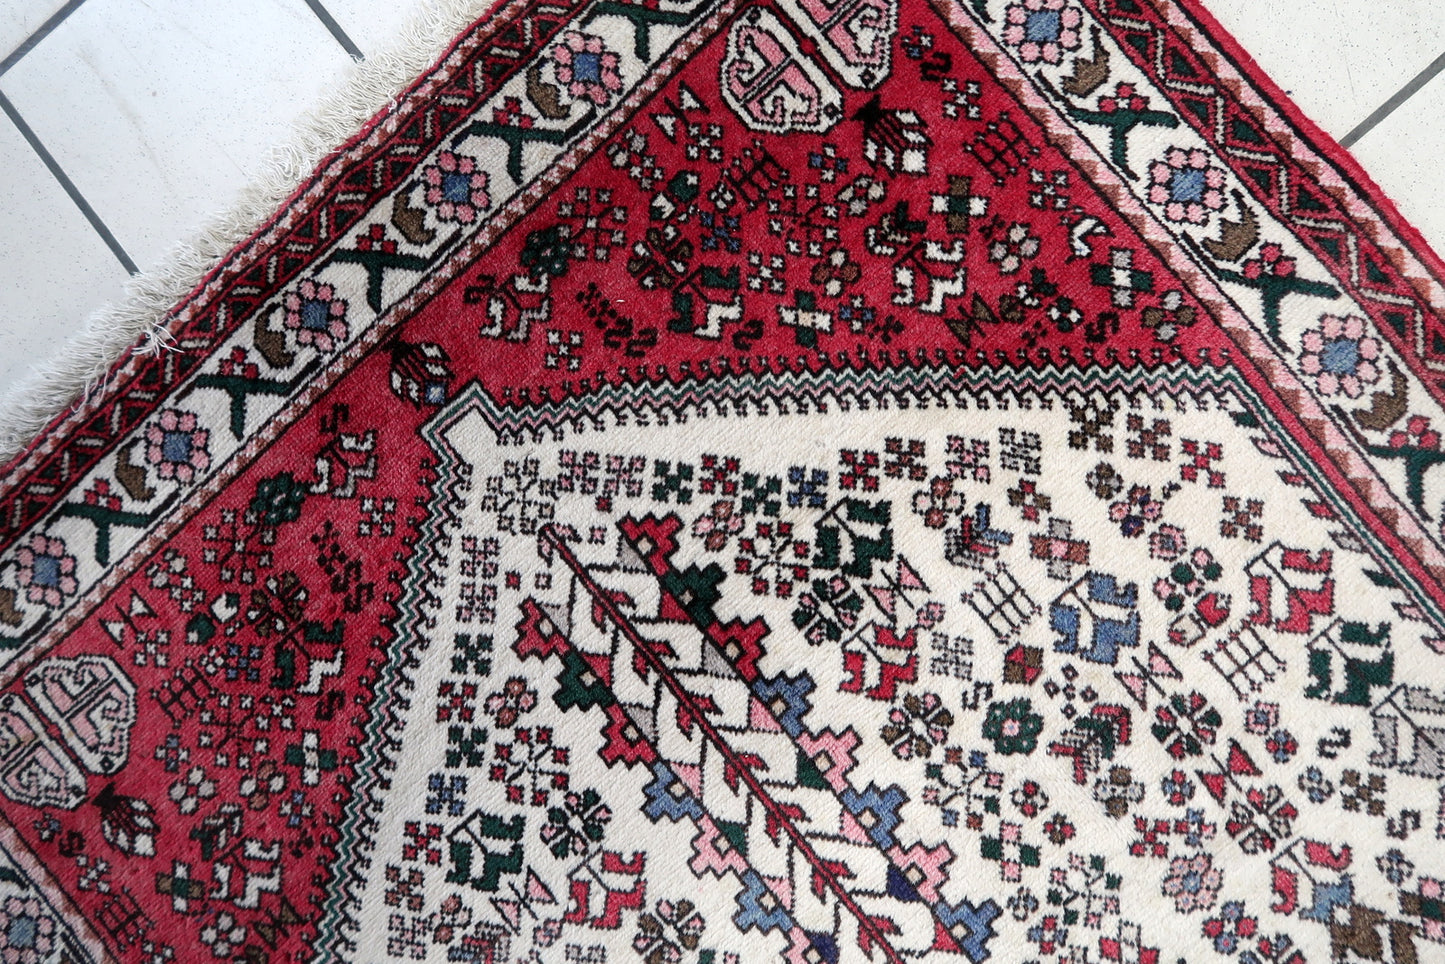 Close-up of the rug's corner, showcasing the intricate craftsmanship and knotting techniques